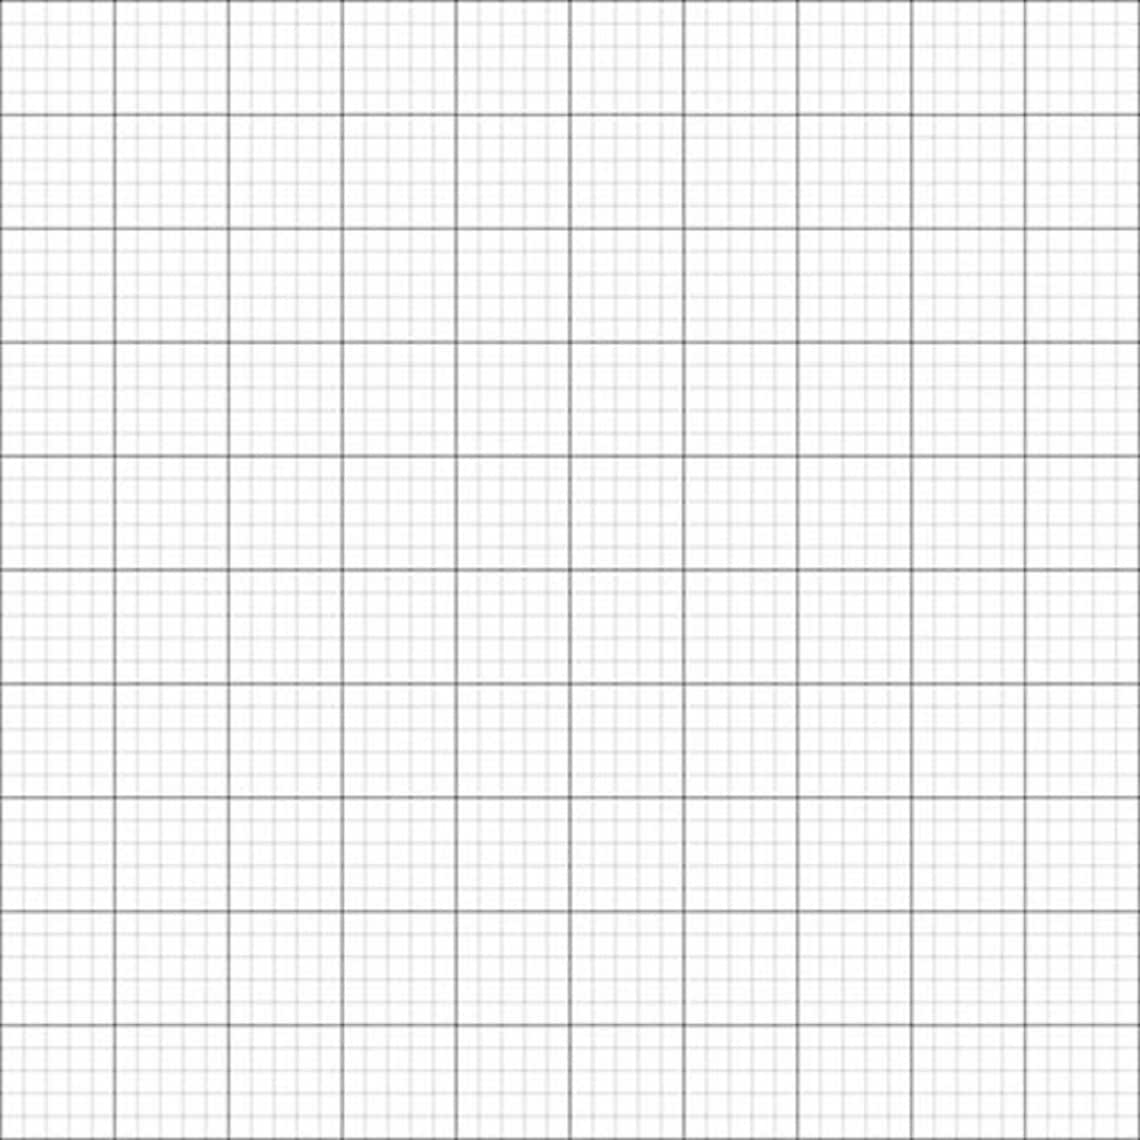 GRID / GRAPH PAPER A0 A1 A21 Size Metric 1mm 5mm 50mm Etsy UK